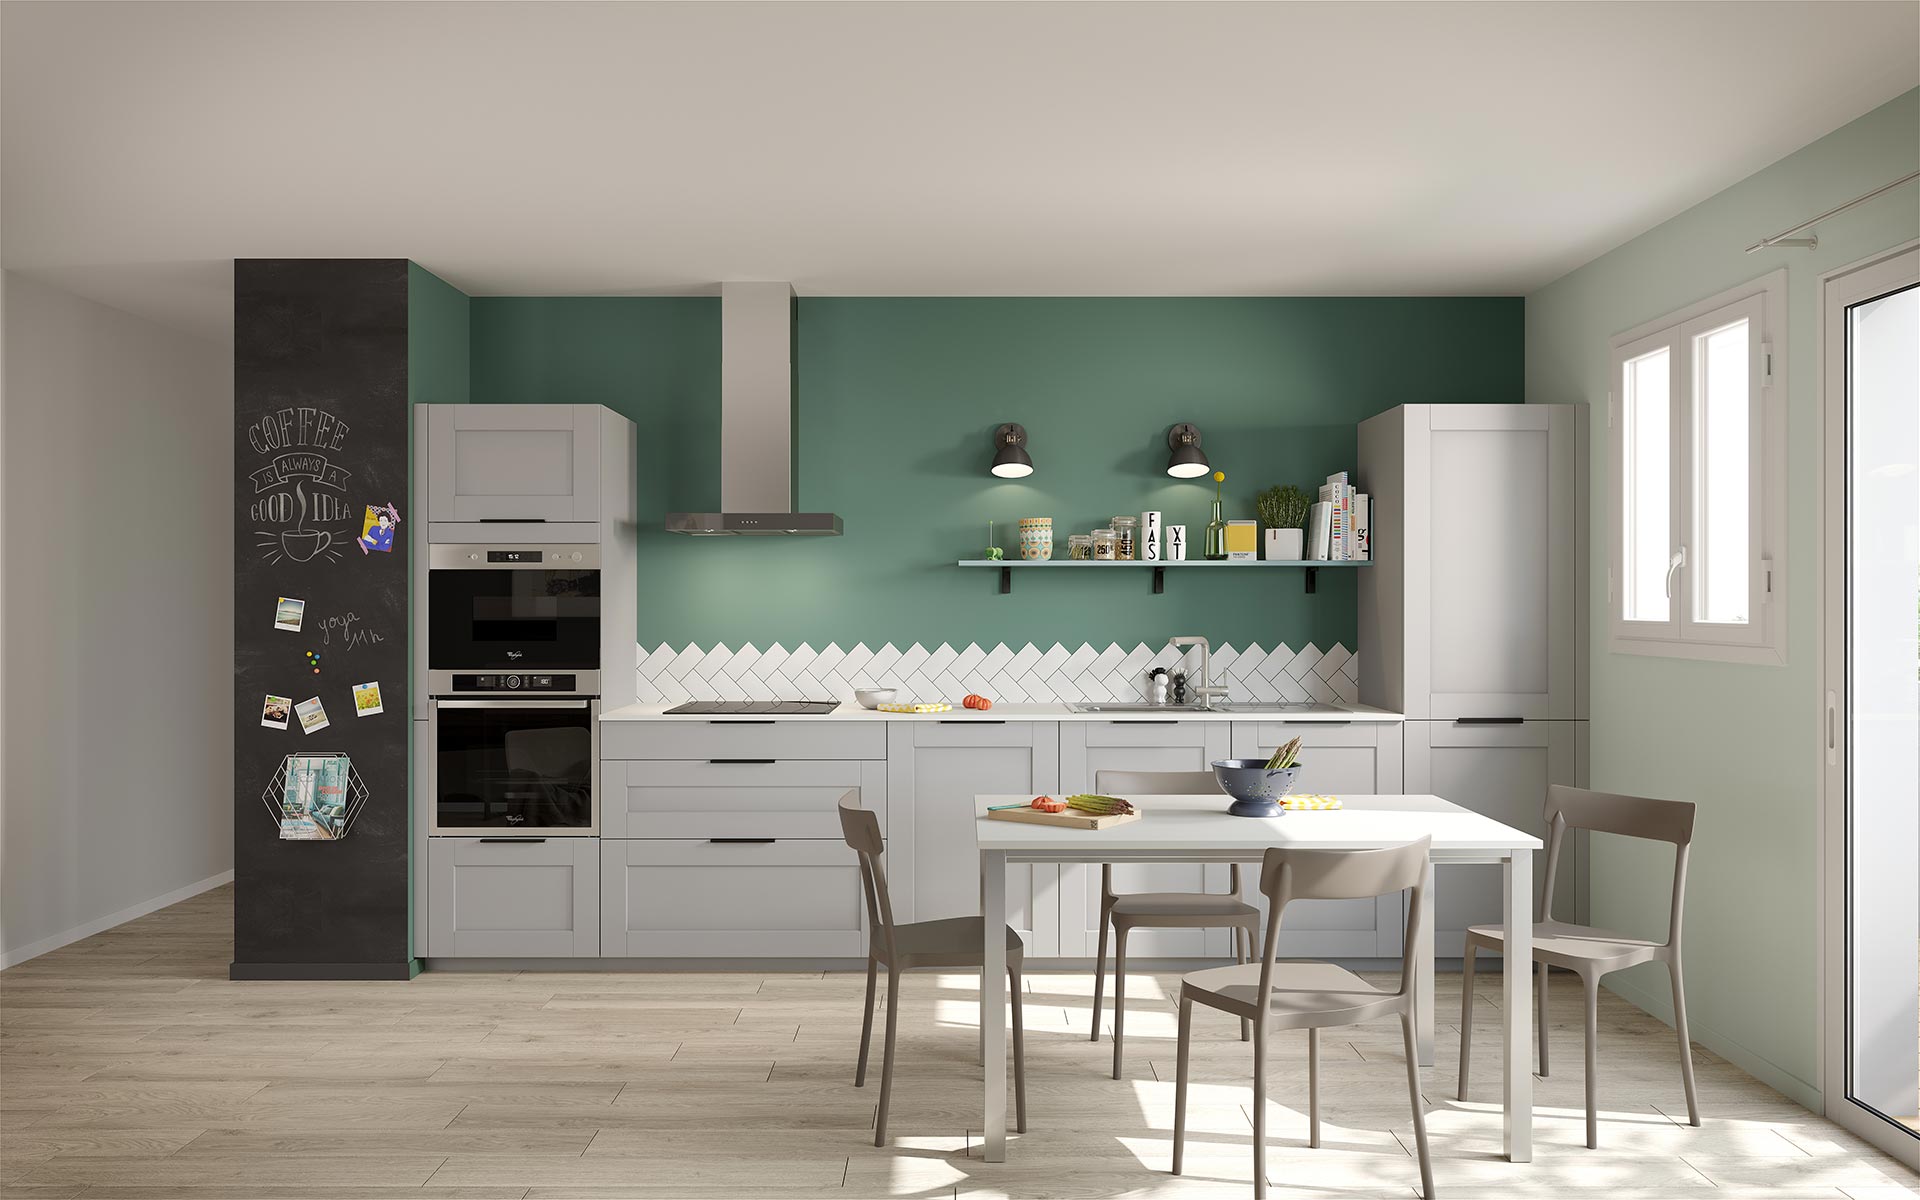 3D image of a kitchen created by Valentinstudio